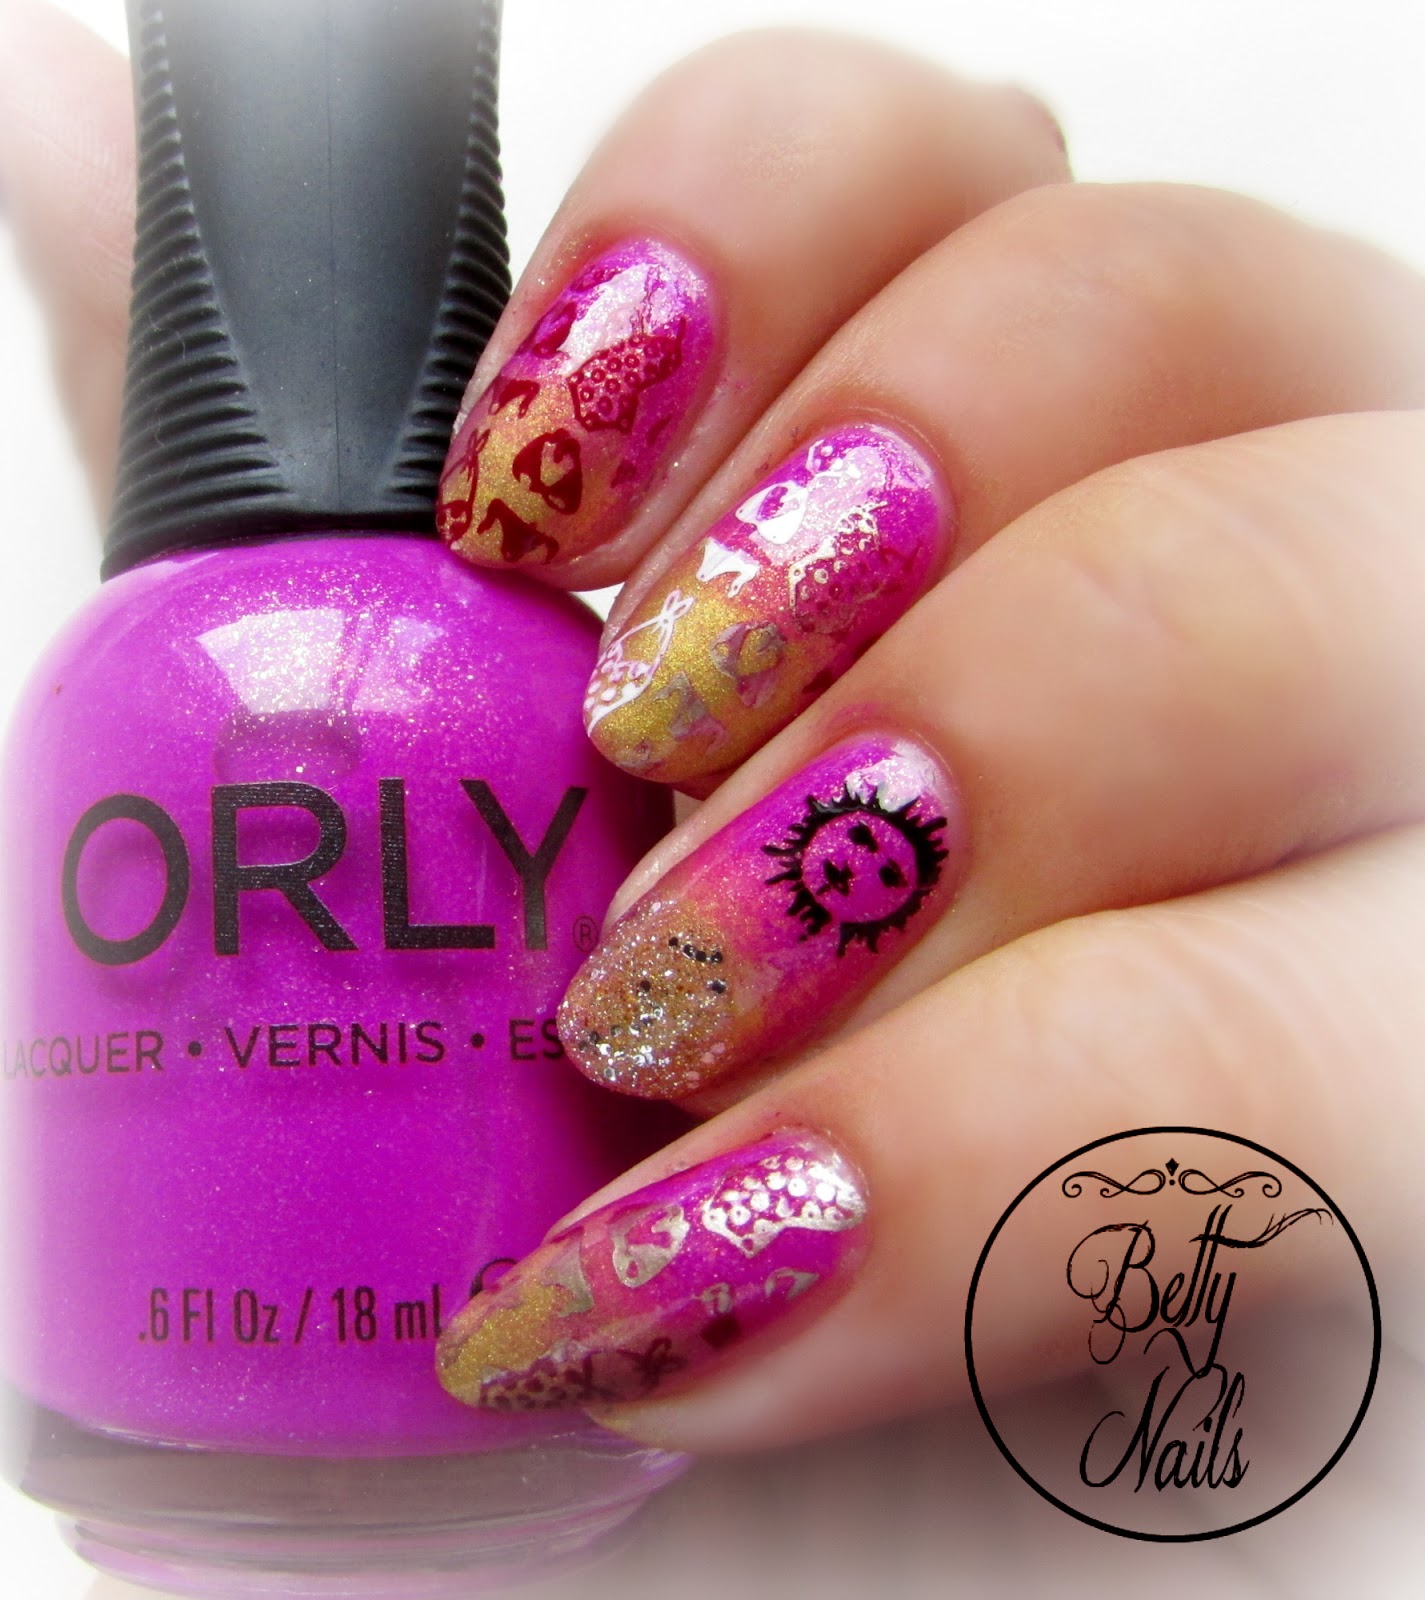 Betty Nails: Orly Hot Tropics - Baked Collection